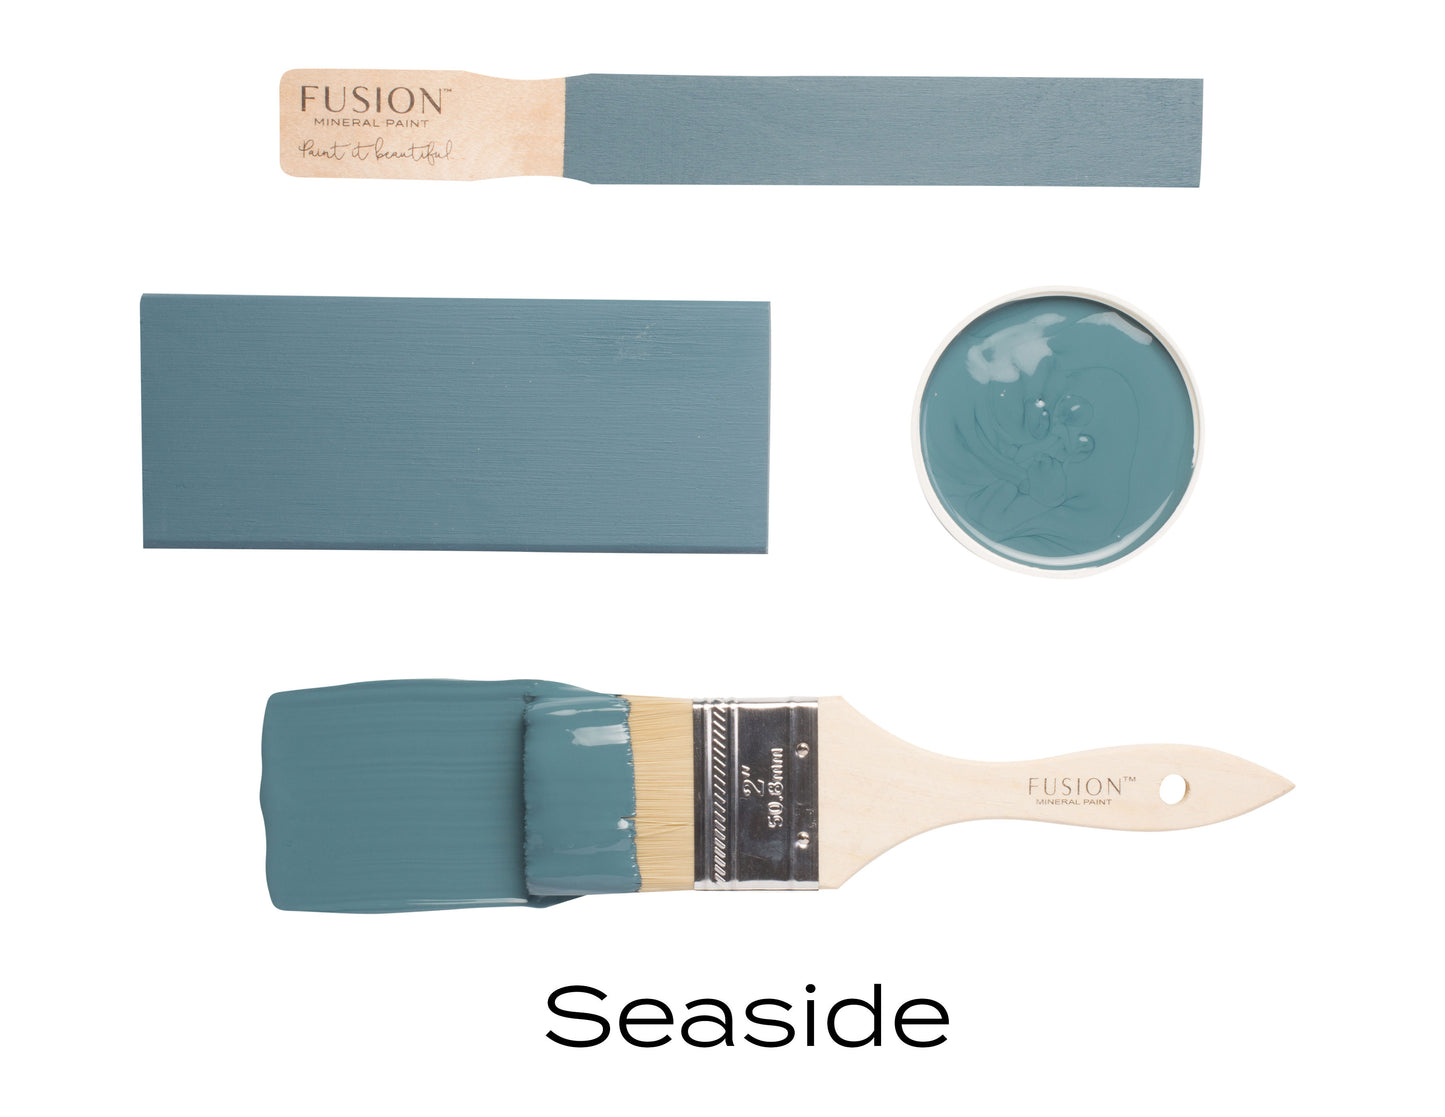 Seaside by Fusion